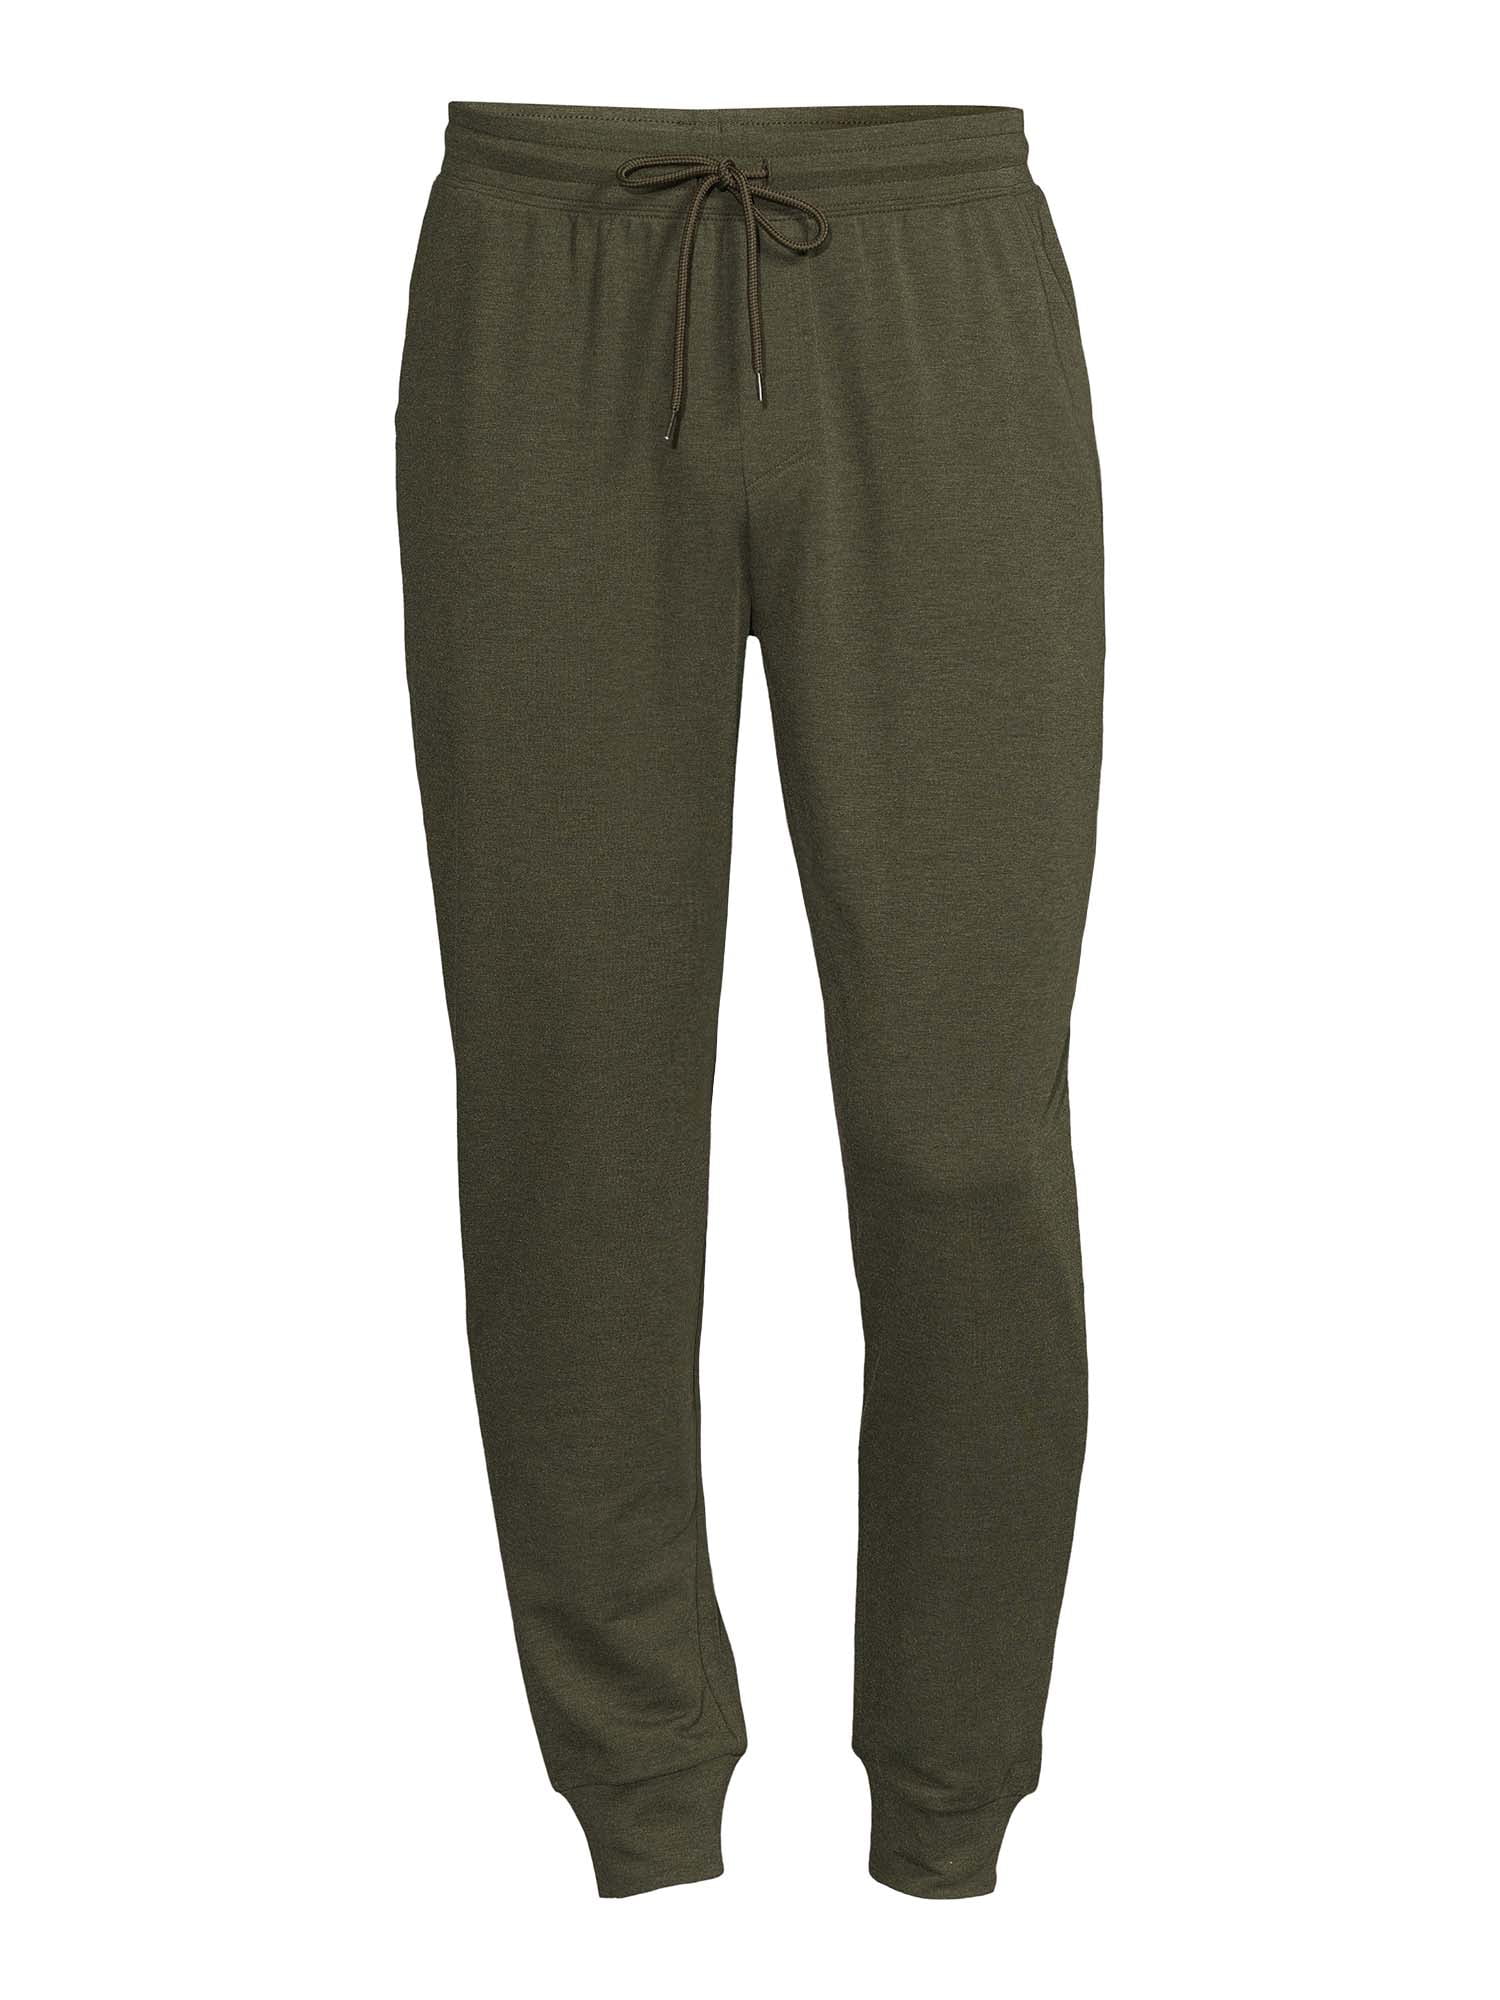 Athletic Works Men's and Big Men's Active Knit Joggers 